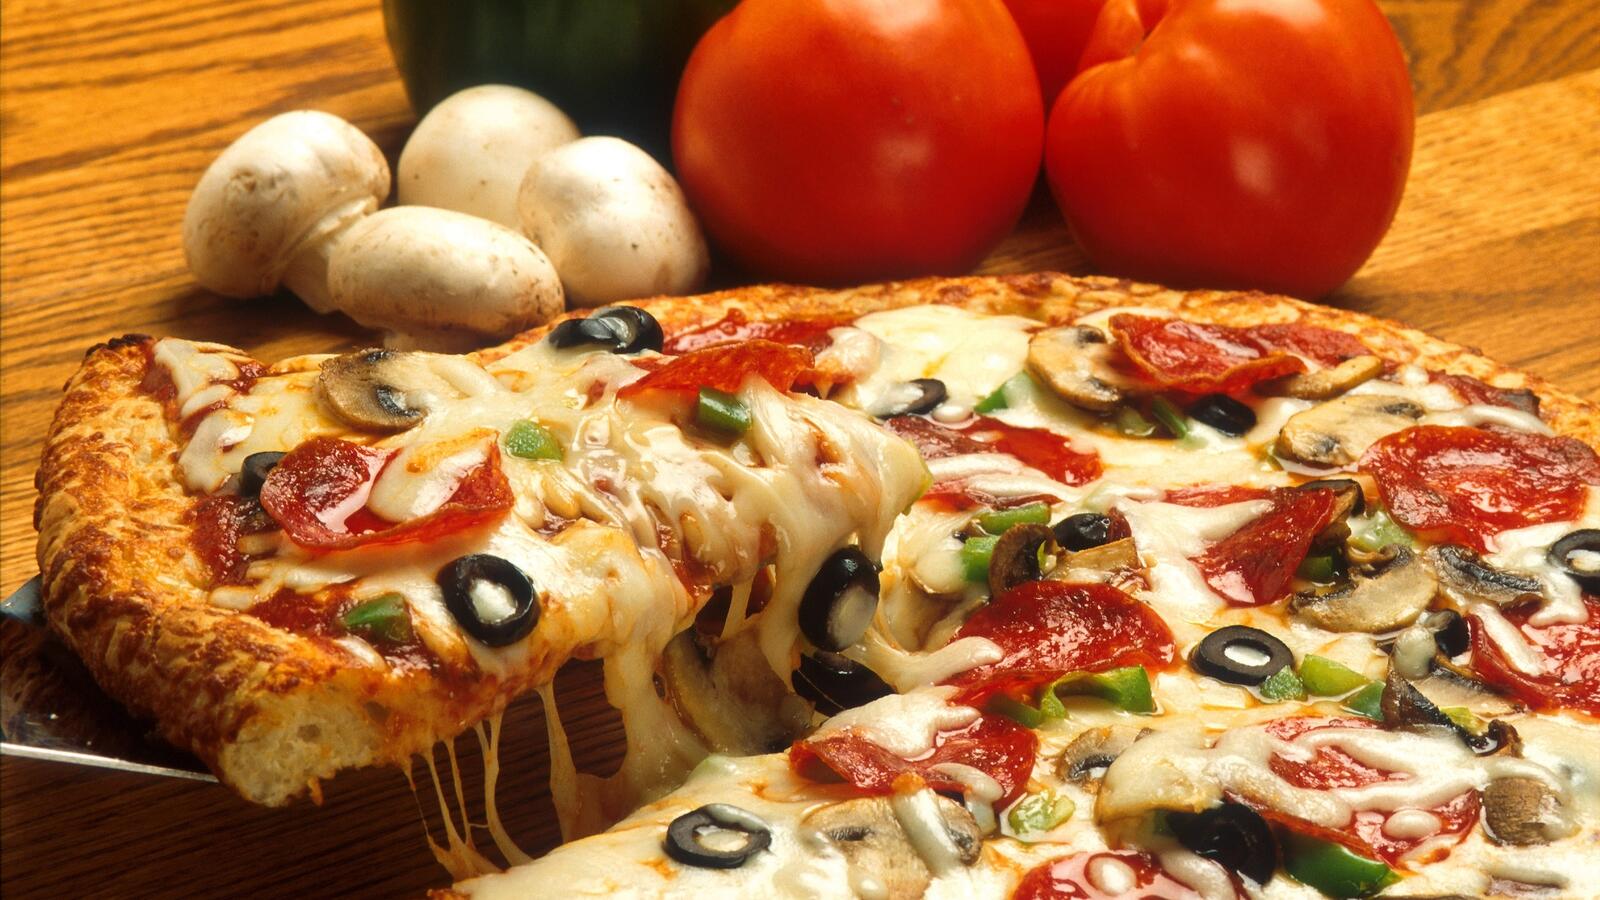 Wallpapers wallpaper pizza tomato fast food on the desktop